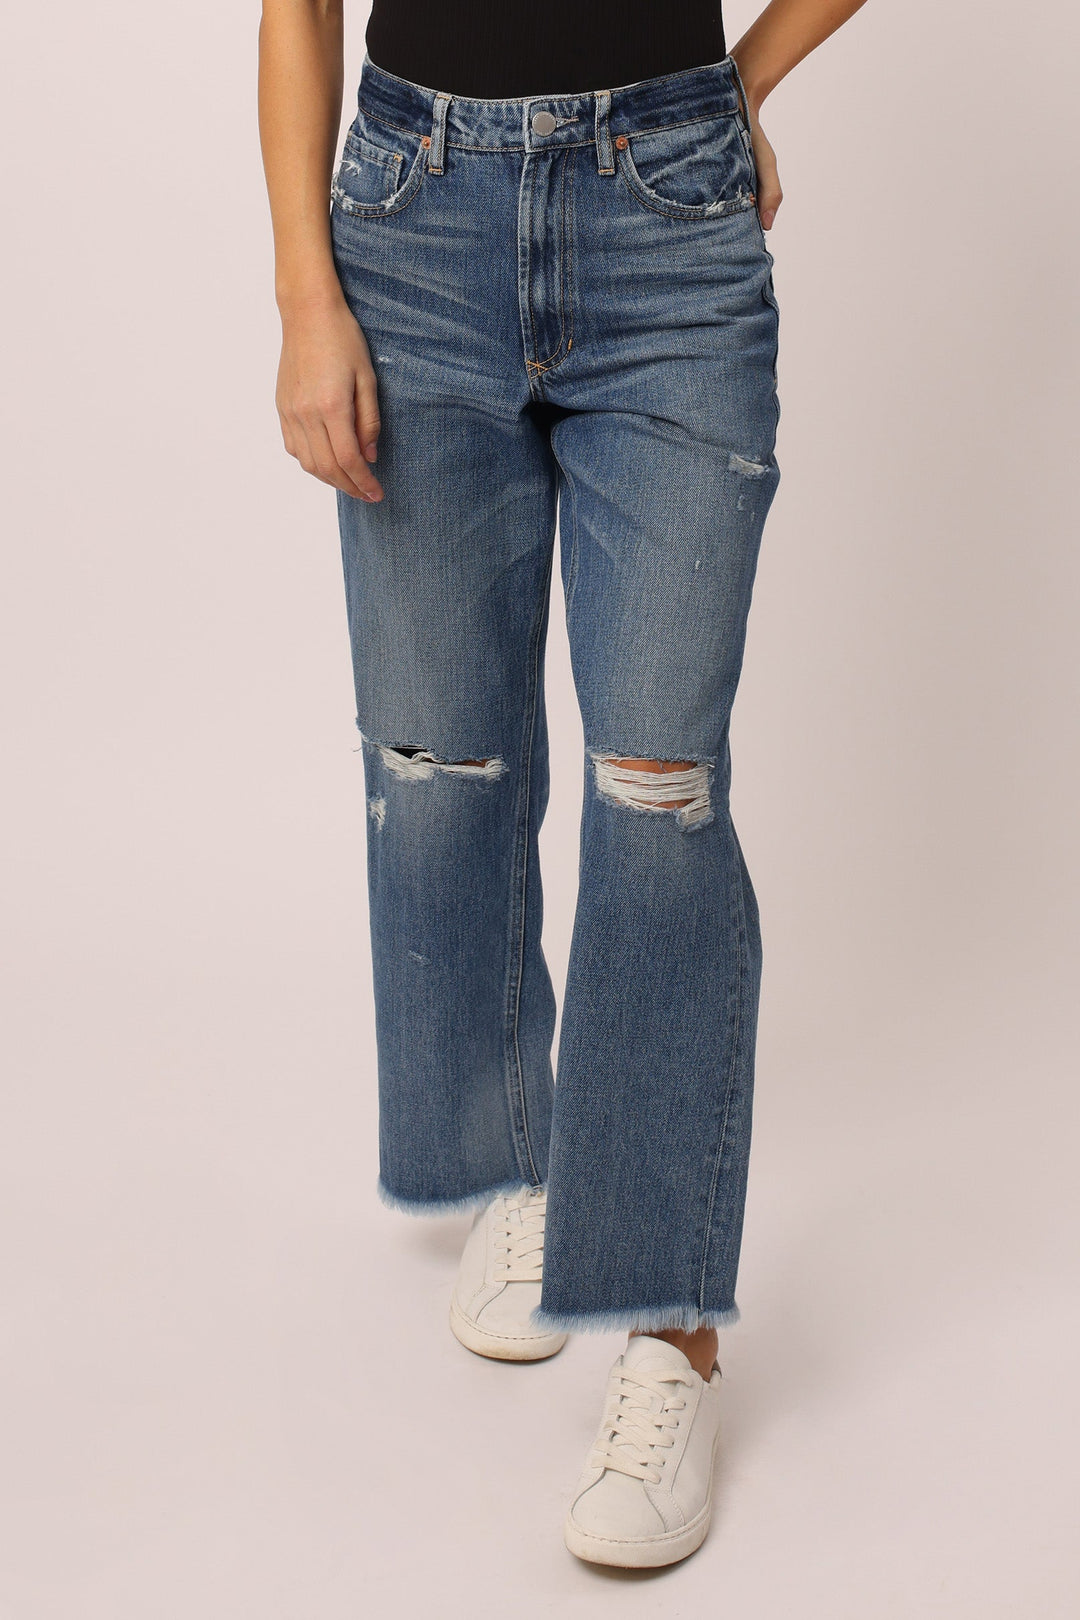 Denim Review: the 90s Ultra High Rise Straight Jeans from